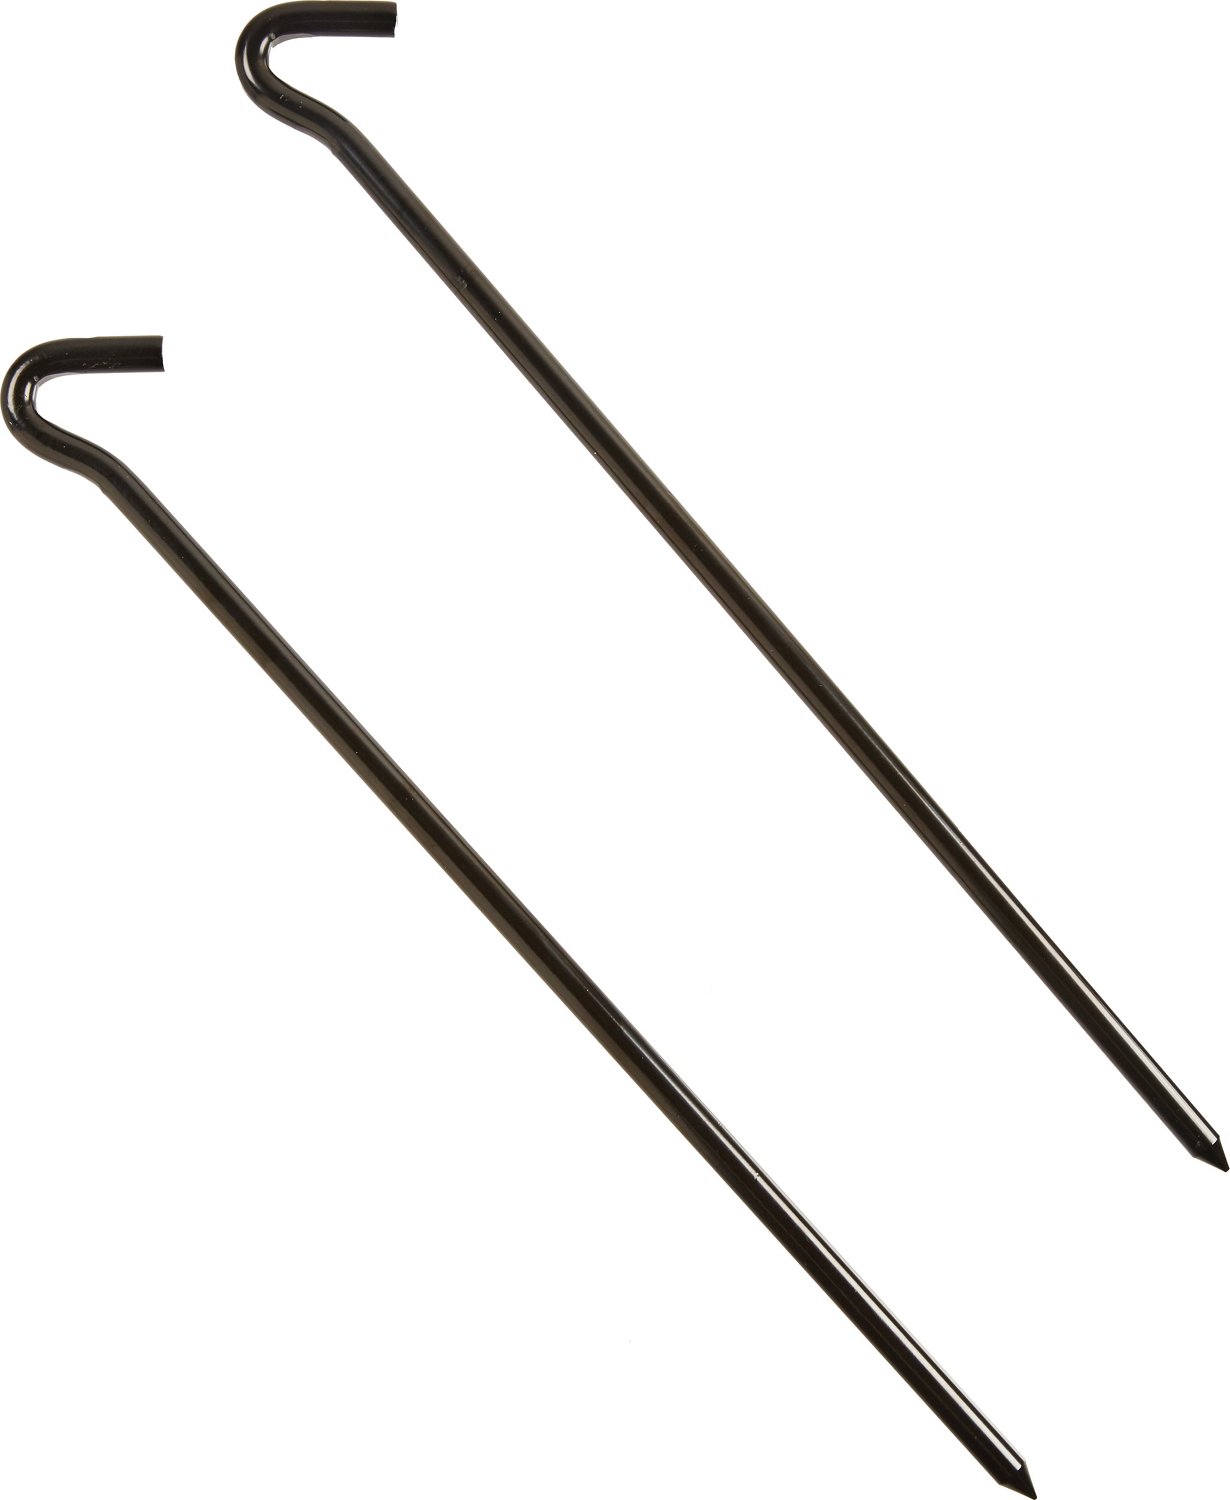 Coghlan's Heavy-Duty Tent Stakes 2-Pack | Academy